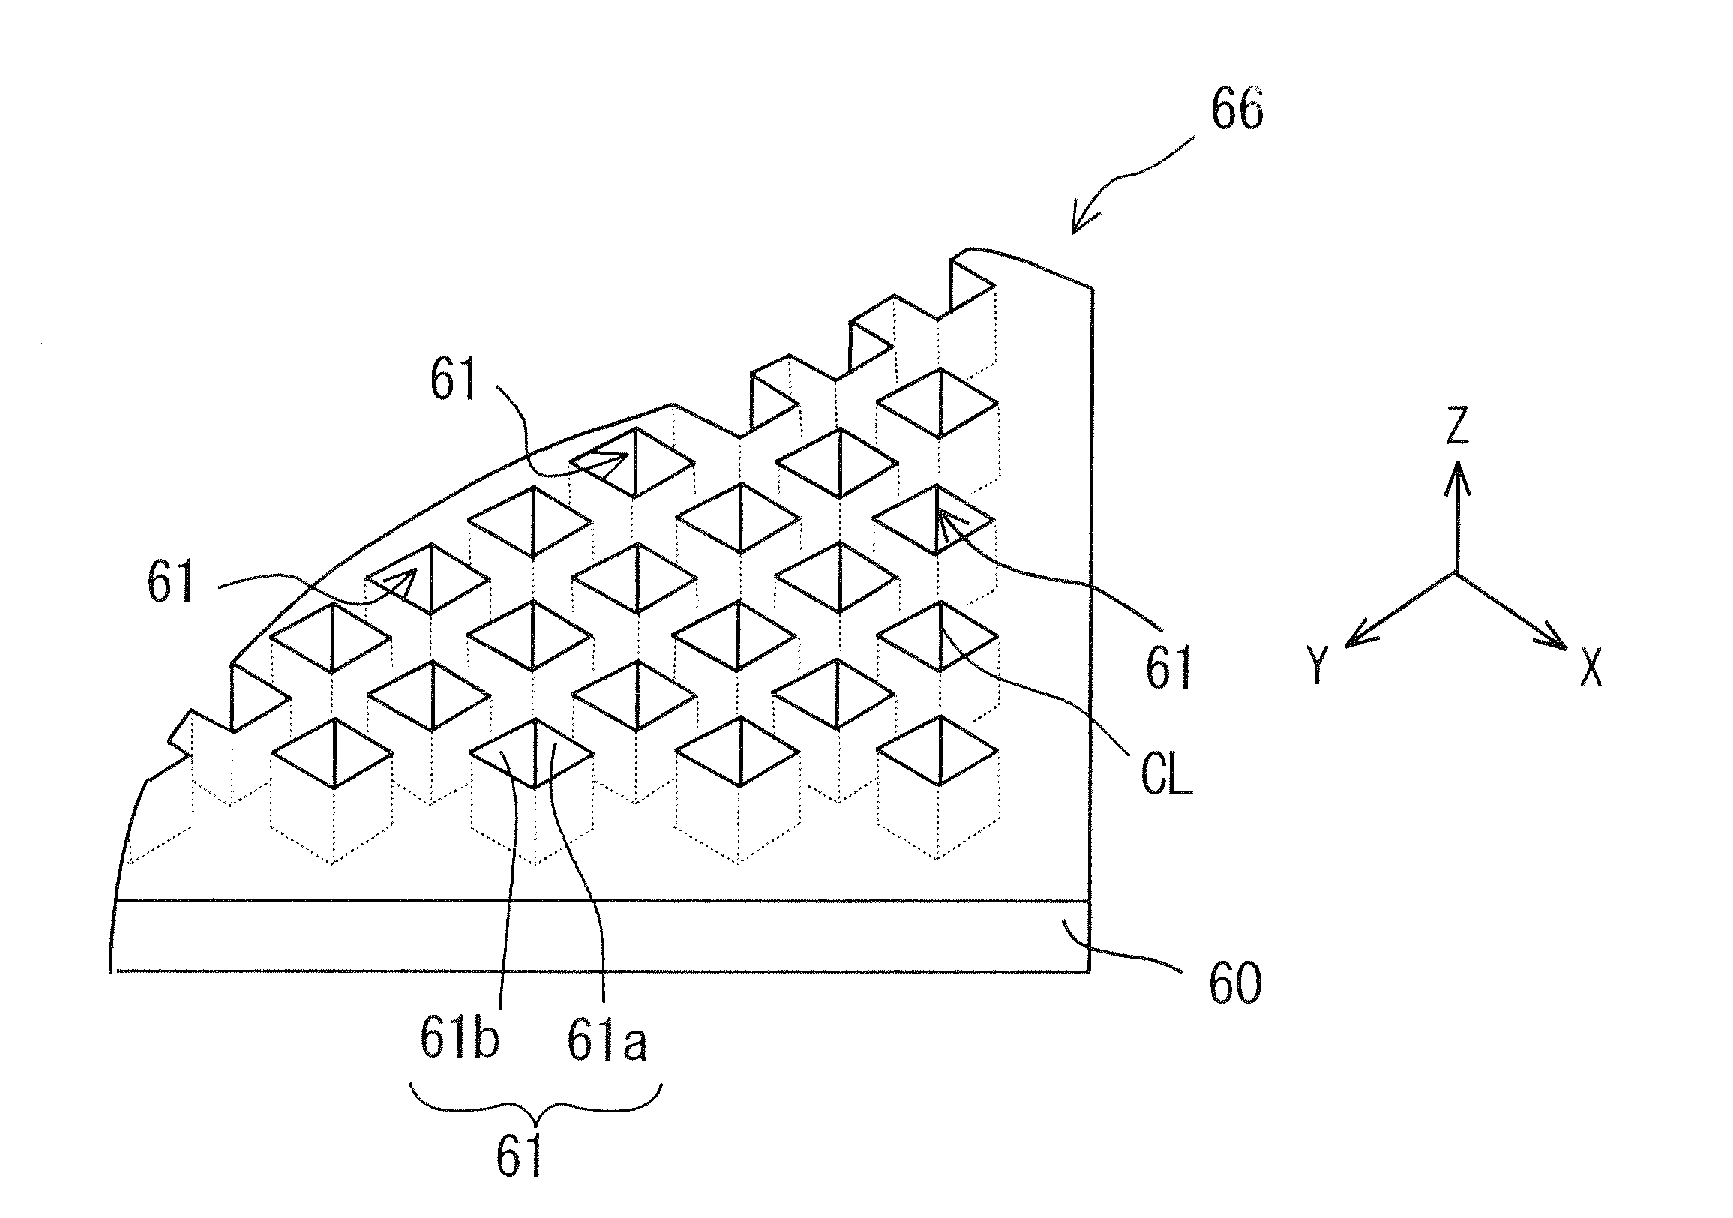 Display device using a dihedral corner reflector array optical element